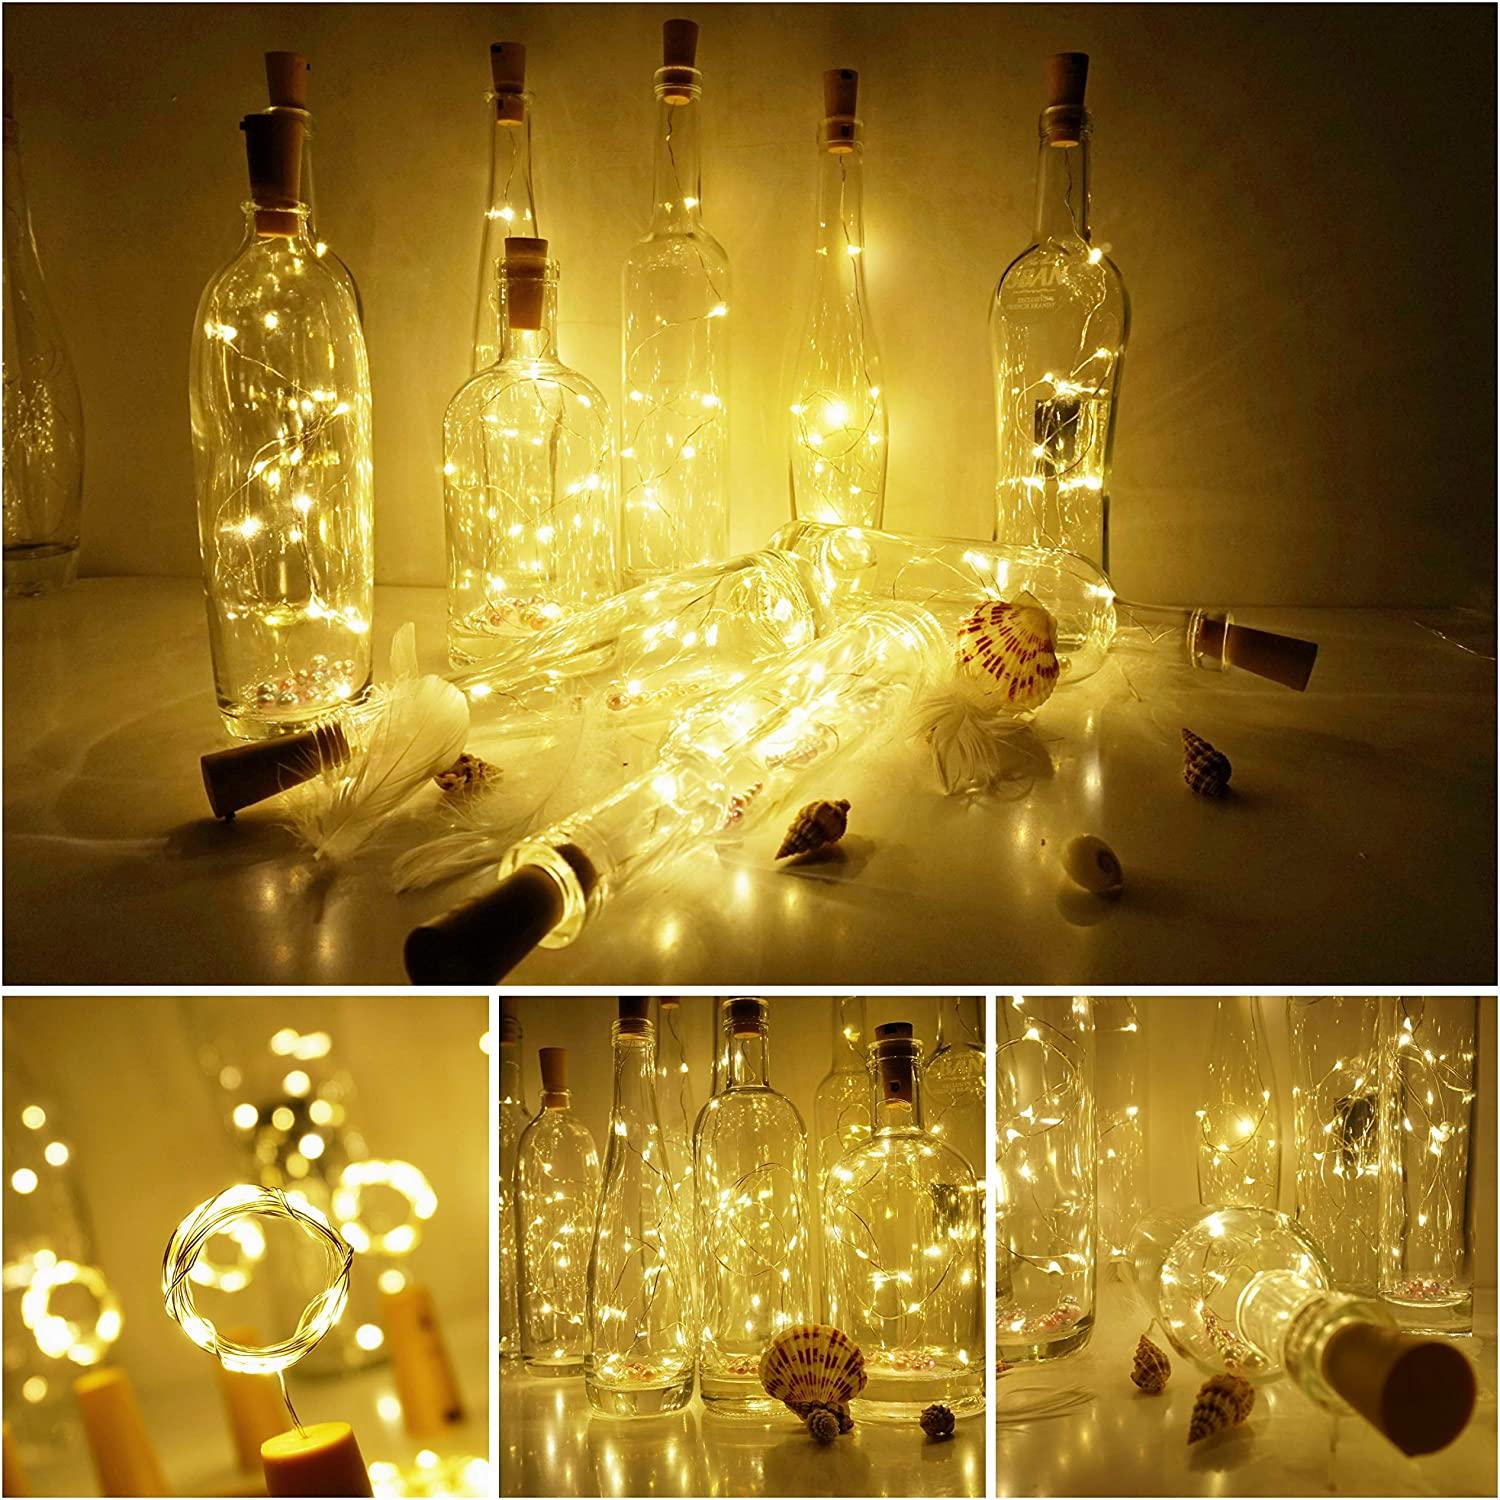 Battery Operated Cork Shape Copper Wire Colorful Fairy Mini String Lights Decorations - Decotree.co Online Shop